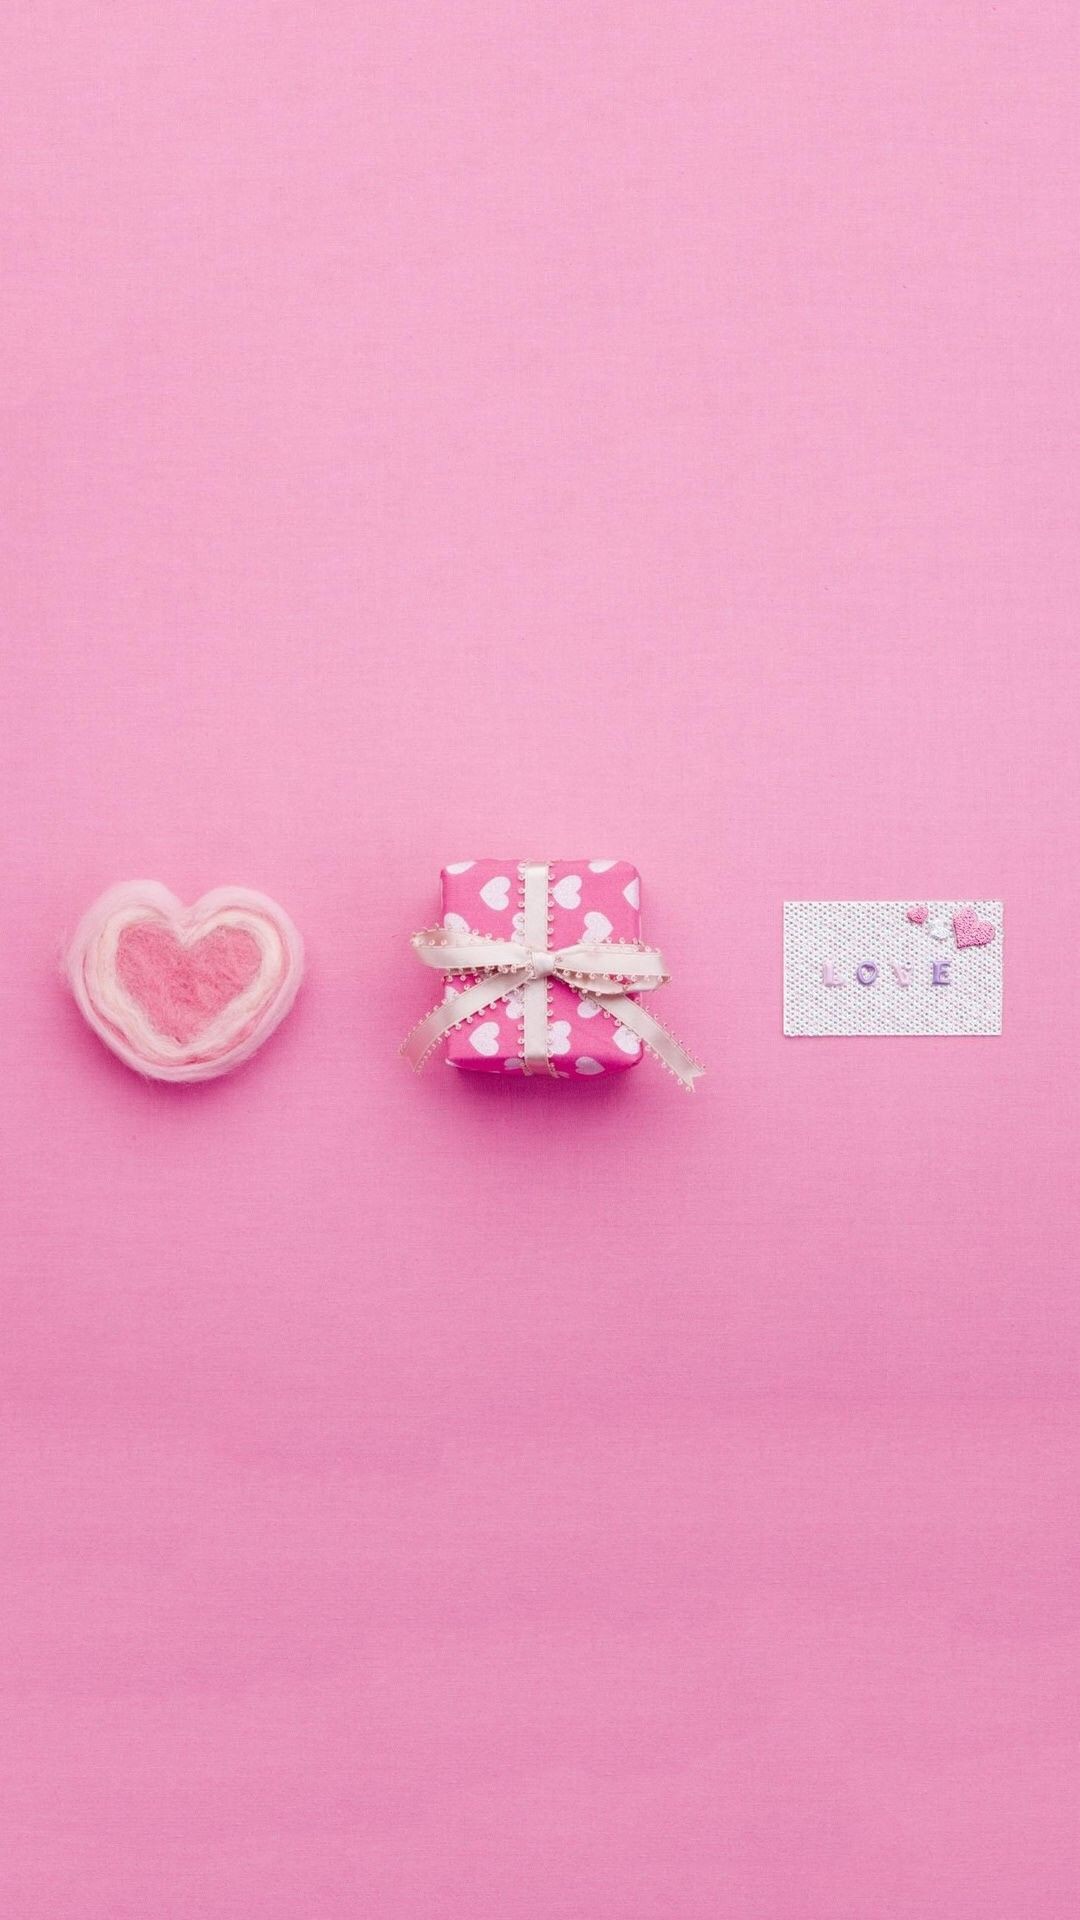 1080x1920 Cute Pink Wallpapers for iPhone (75+ images)